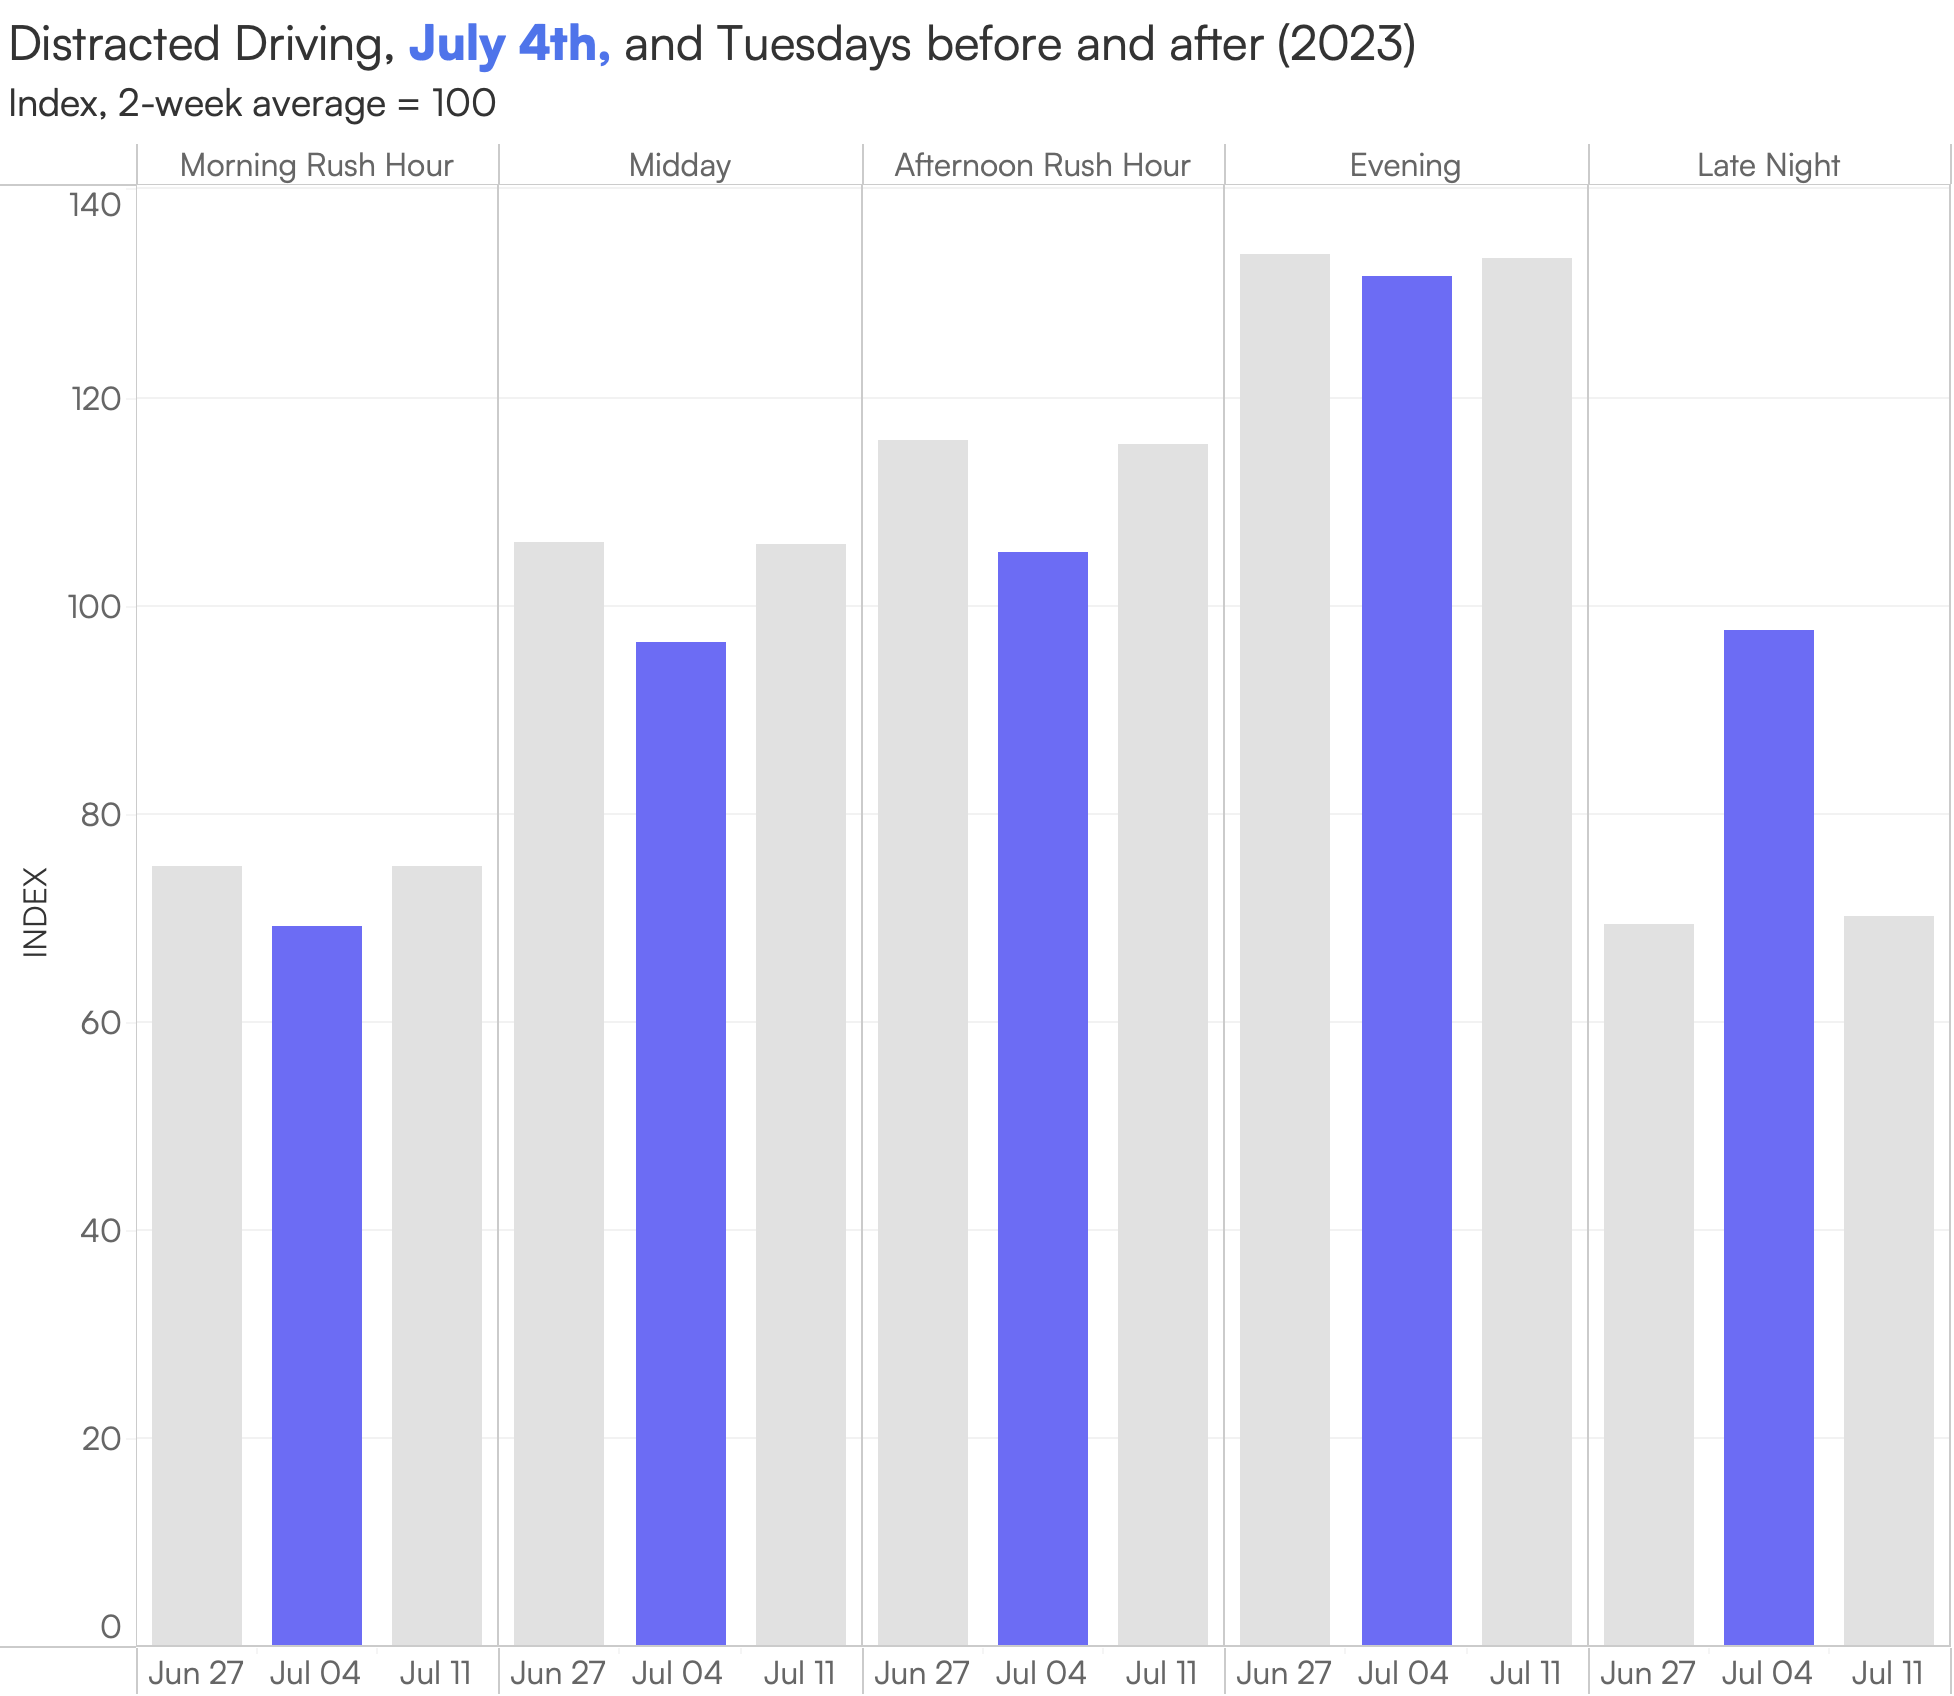 Graph showing distracted driving frequency on July 4th, and the Tuesdays before and after in 2023